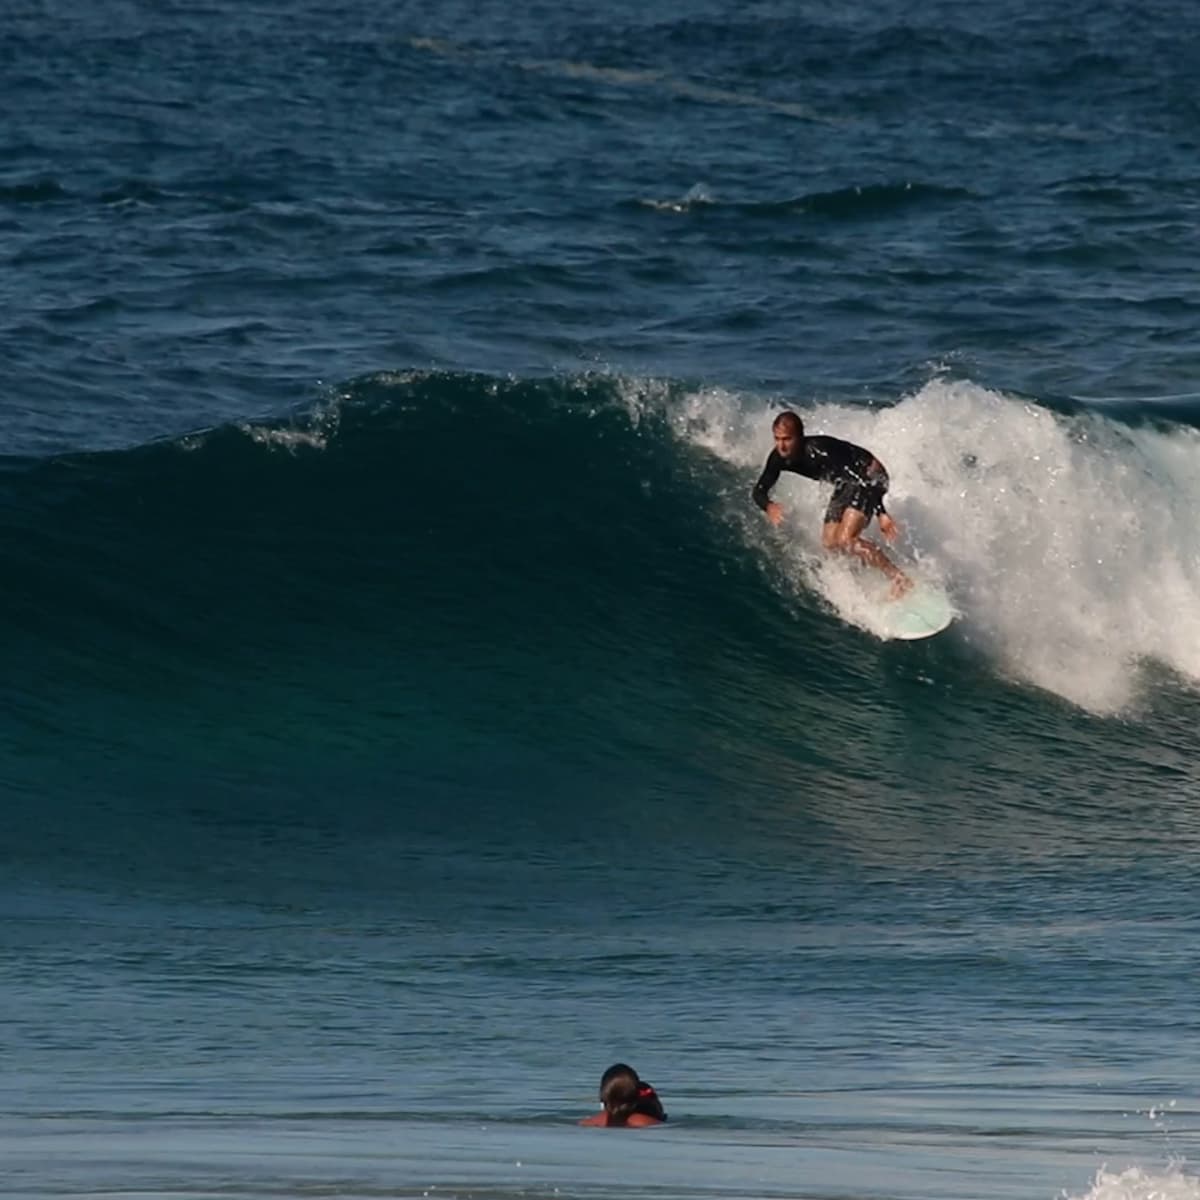 Surfing 201: How To Do a Carving 360 Like a Pro